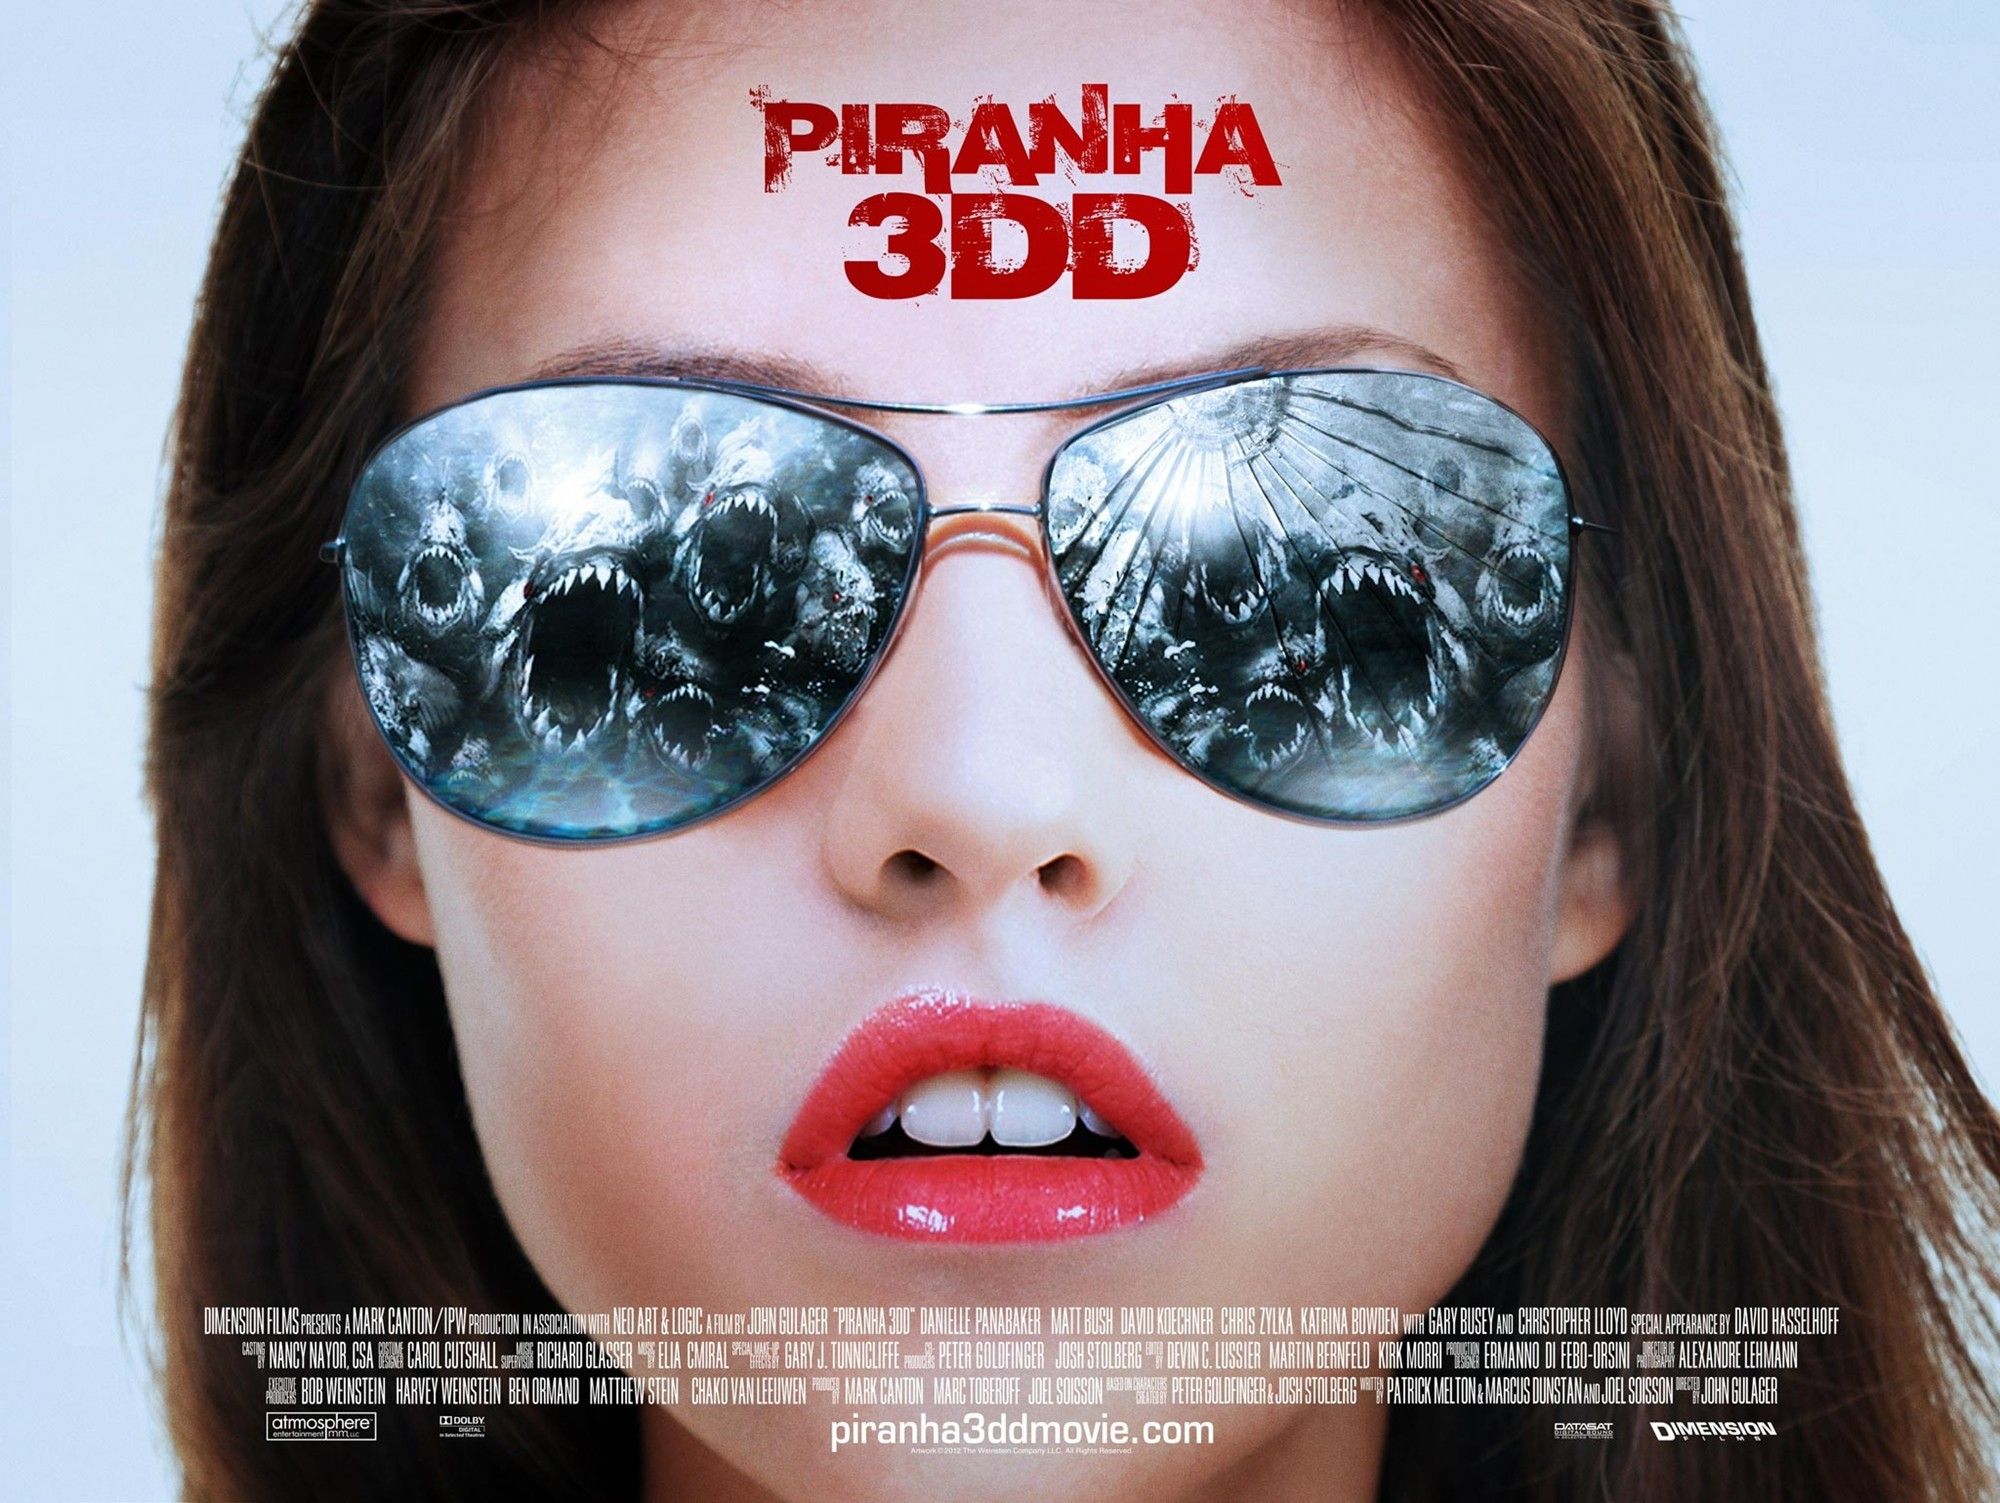 3D BluRay Movies Side by Side 1080p for 3D TV 01616-131616 large image 0